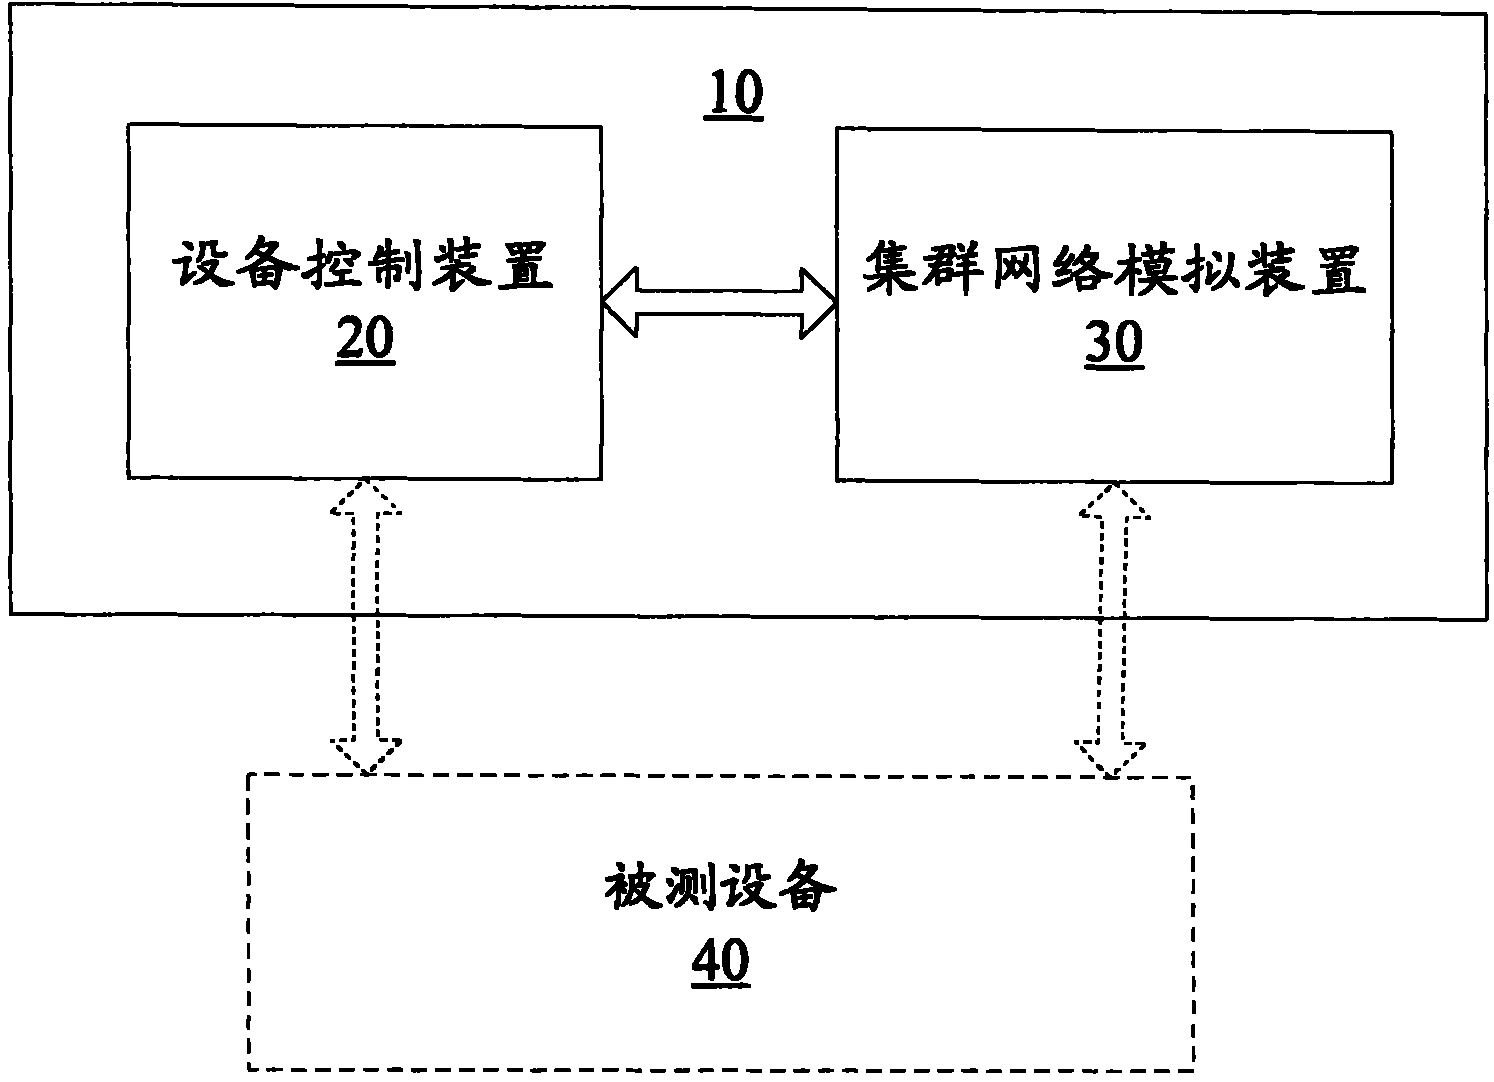 Cluster managerial automatization test system and method of ethernet switchboard